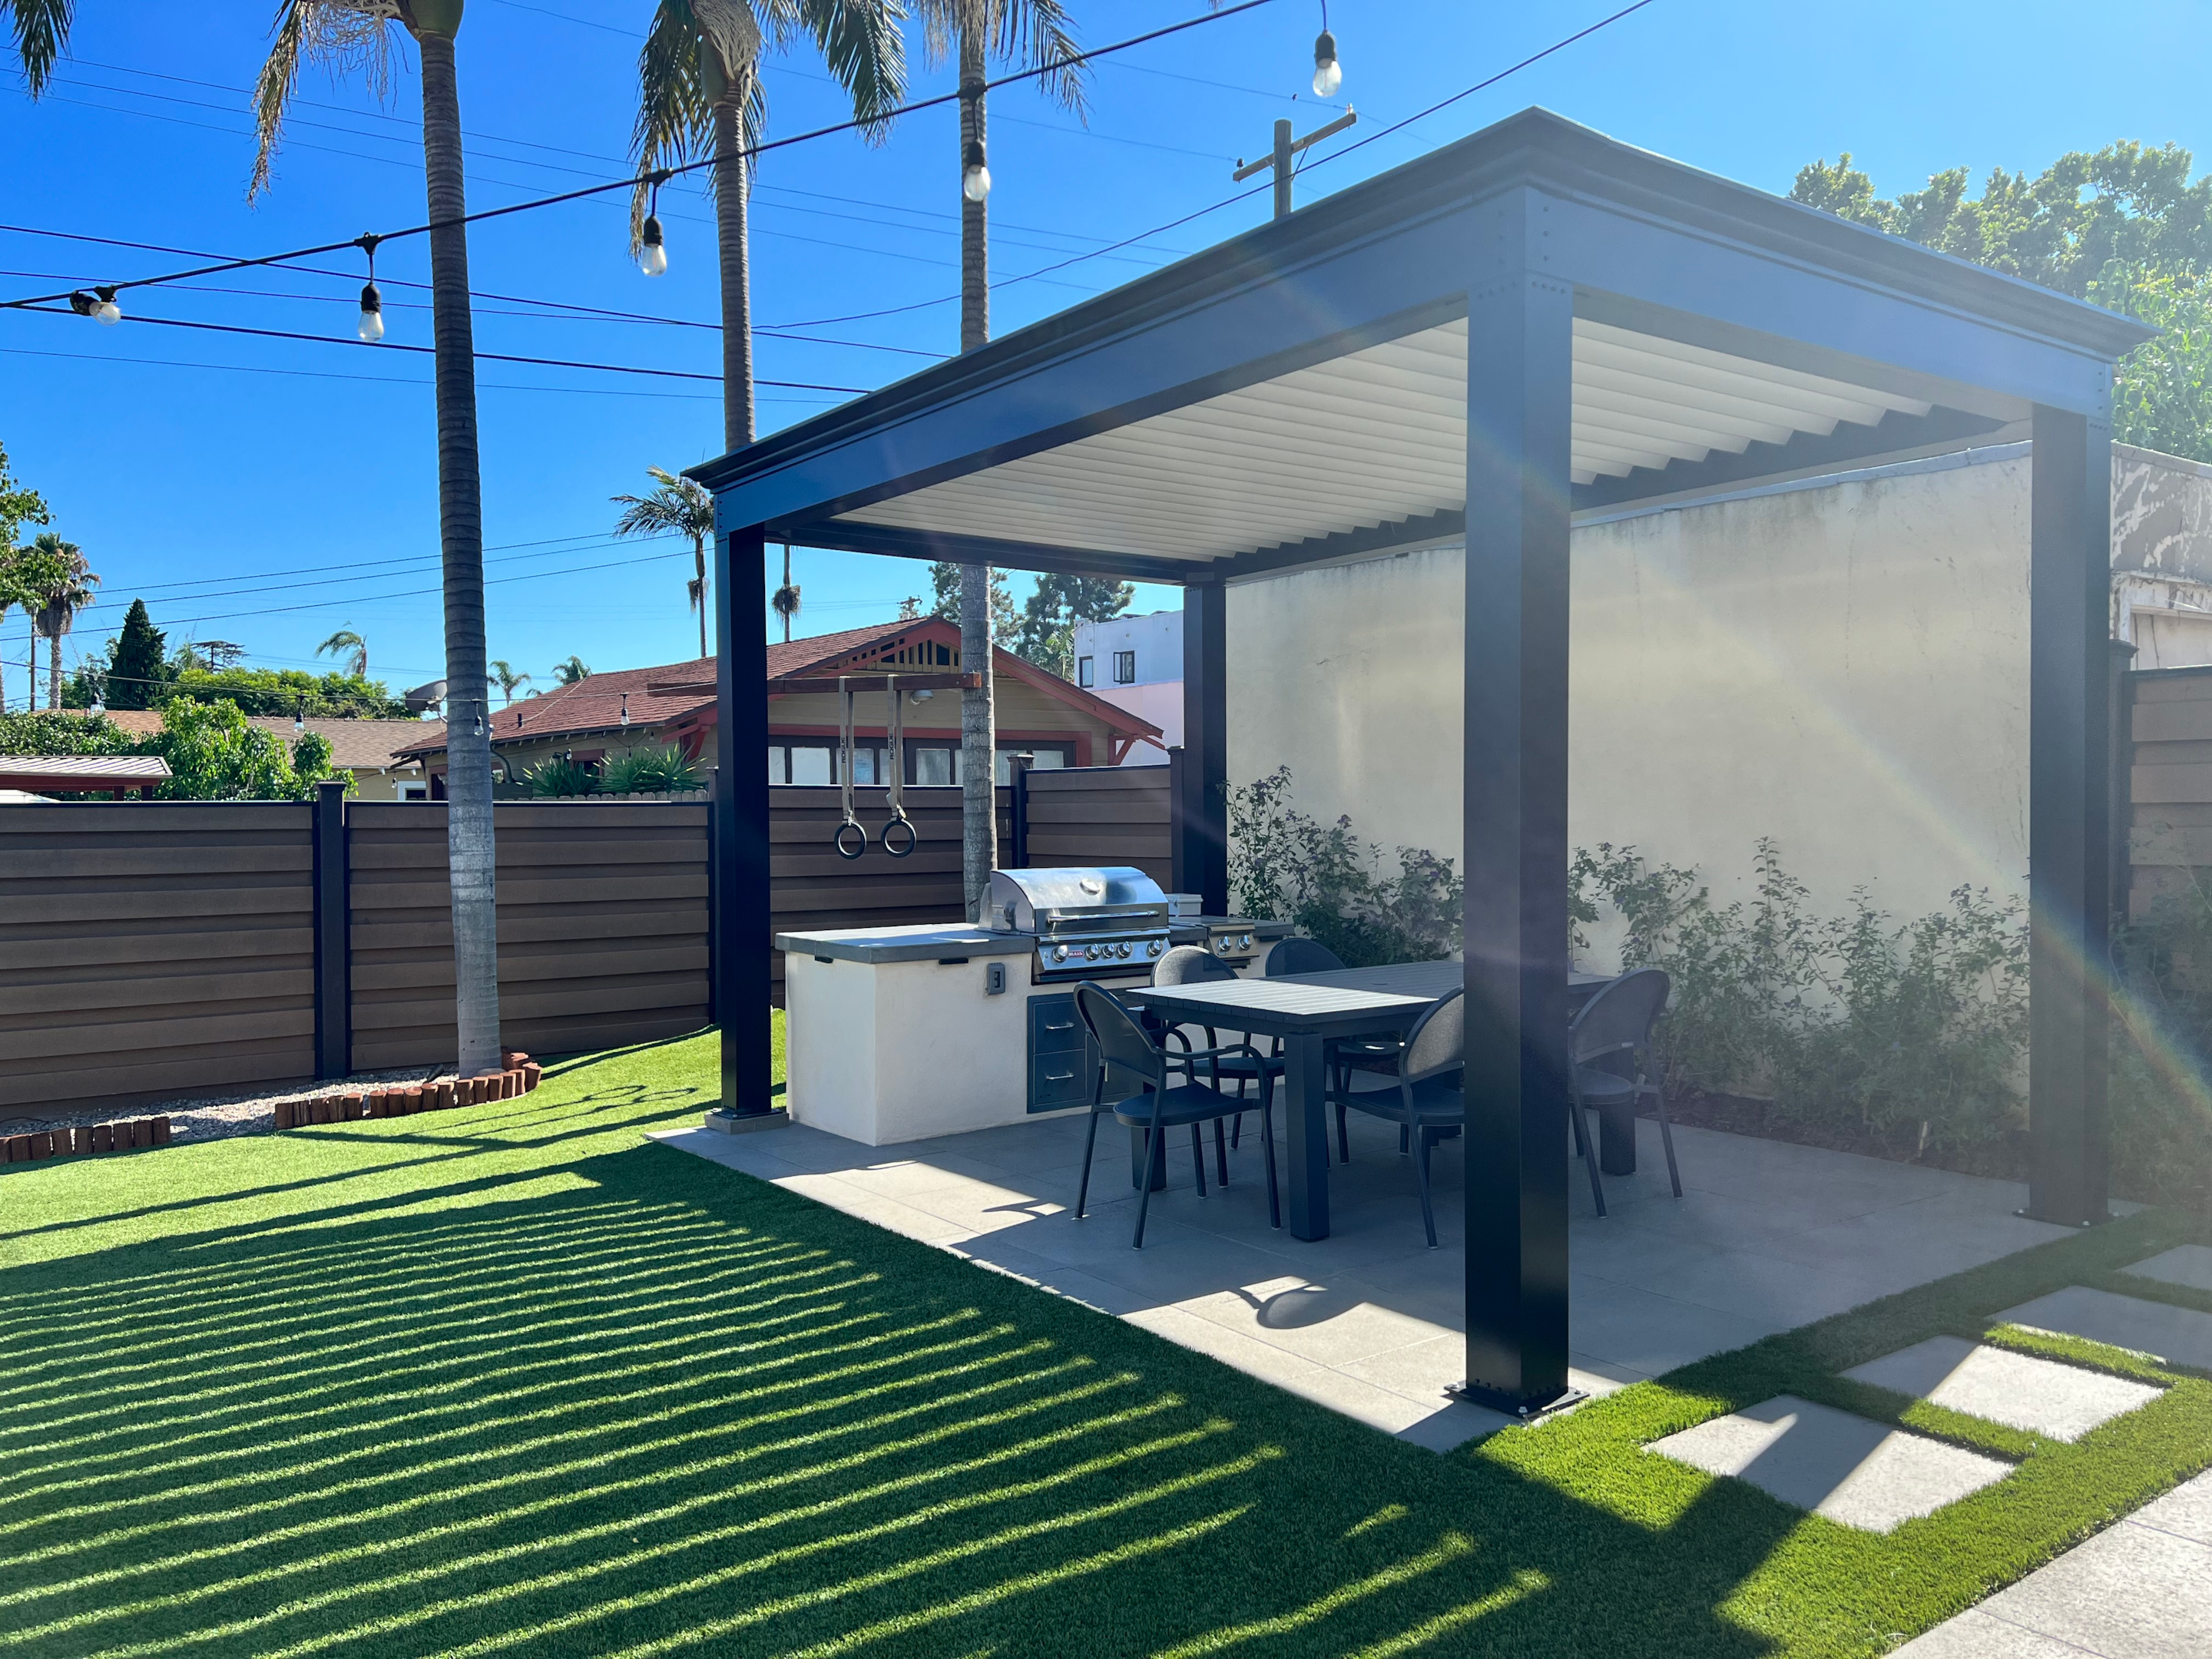 A happy customer with a pergola in their backyard